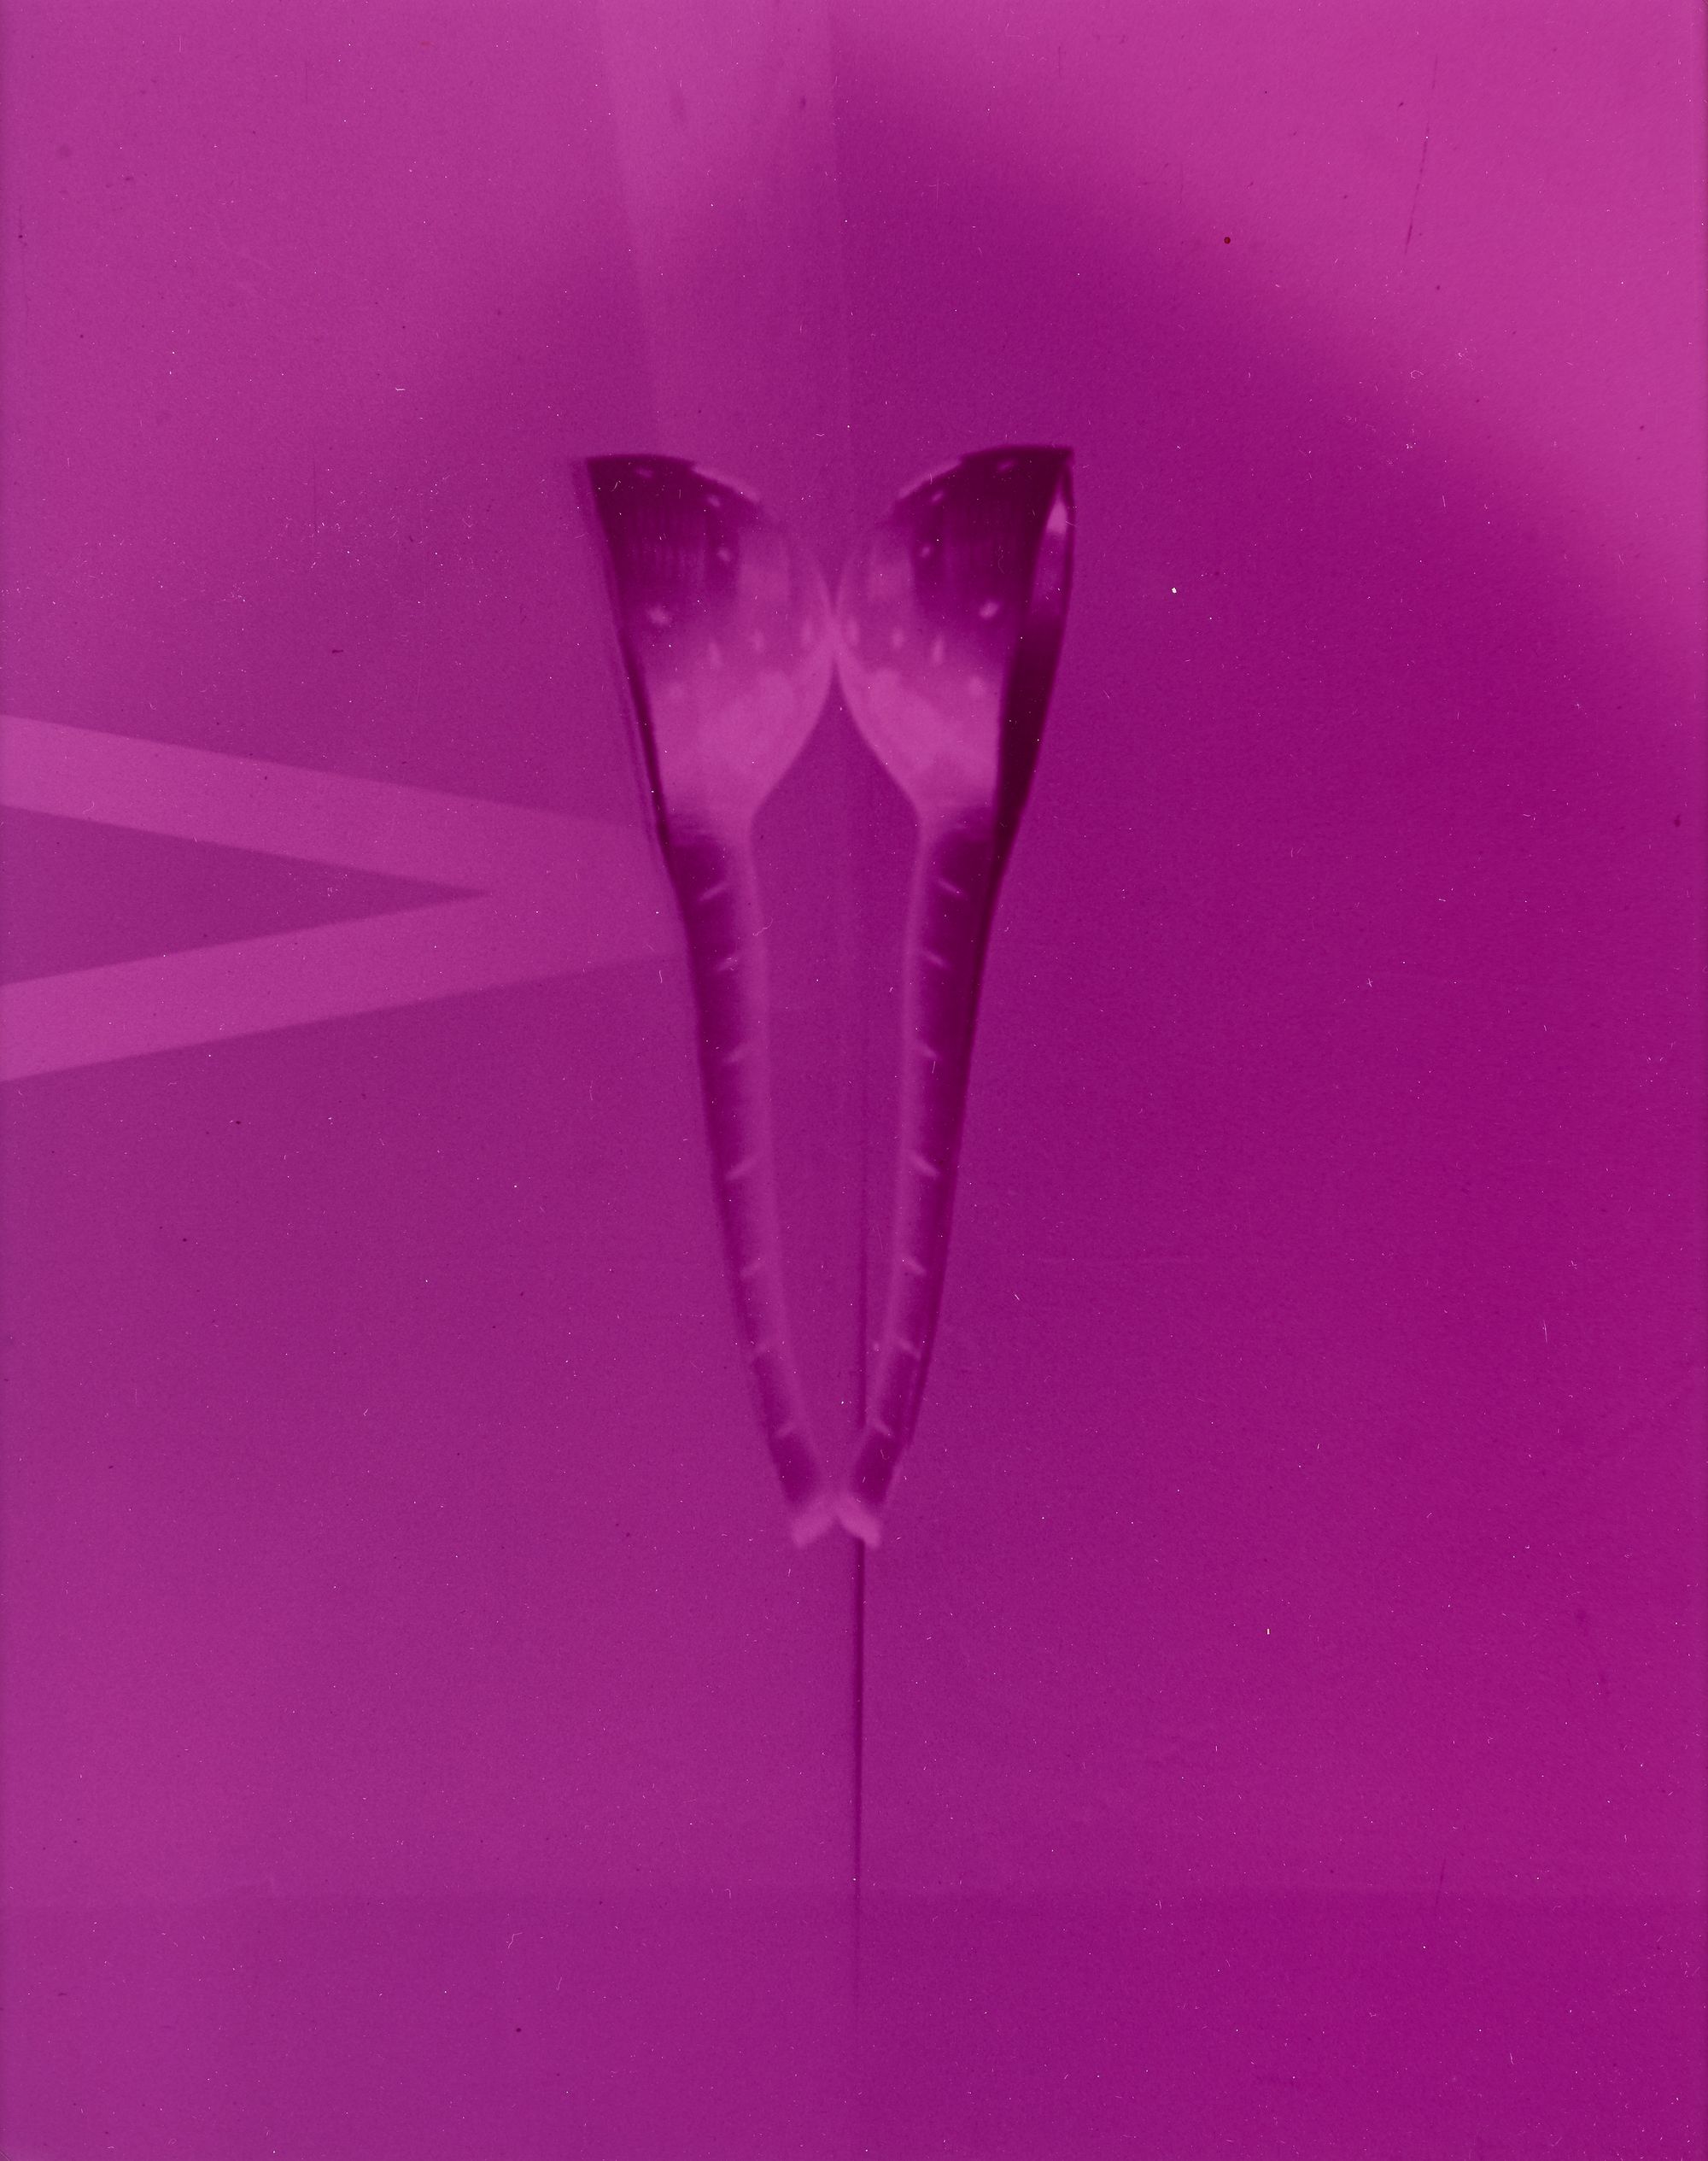 Pink abstract image of two mirrored spoons